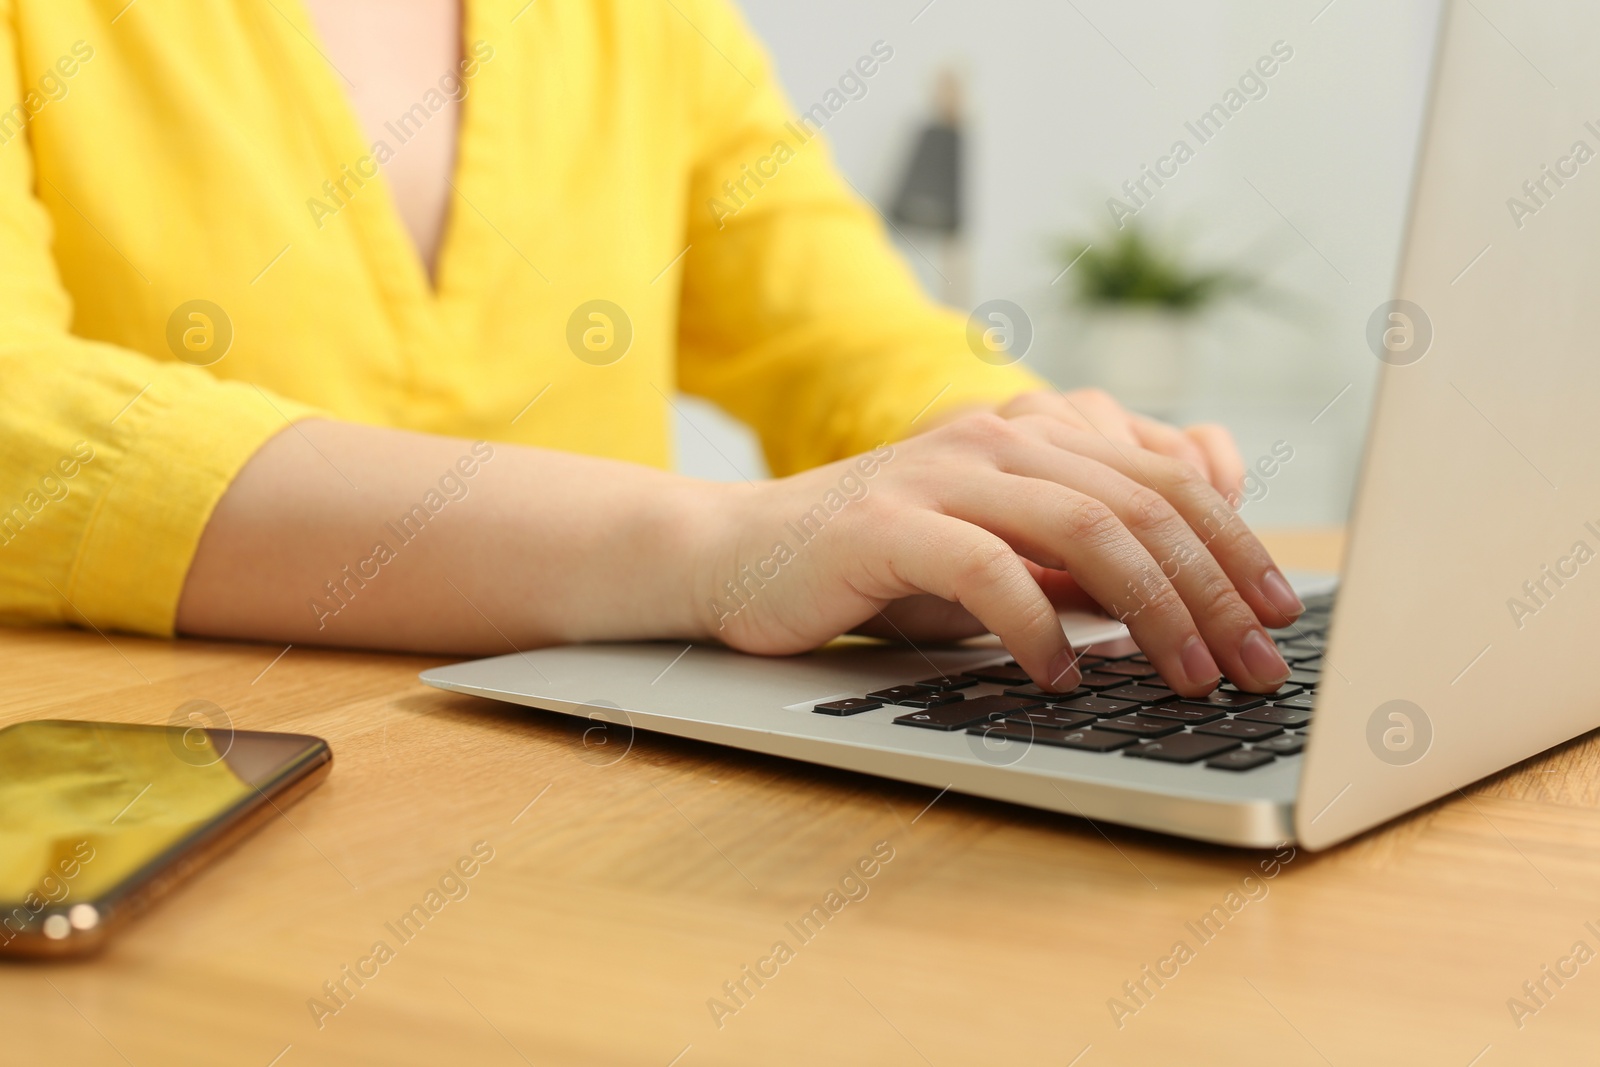 Photo of Home workplace. Woman working on laptop at wooden desk indoors, closeup